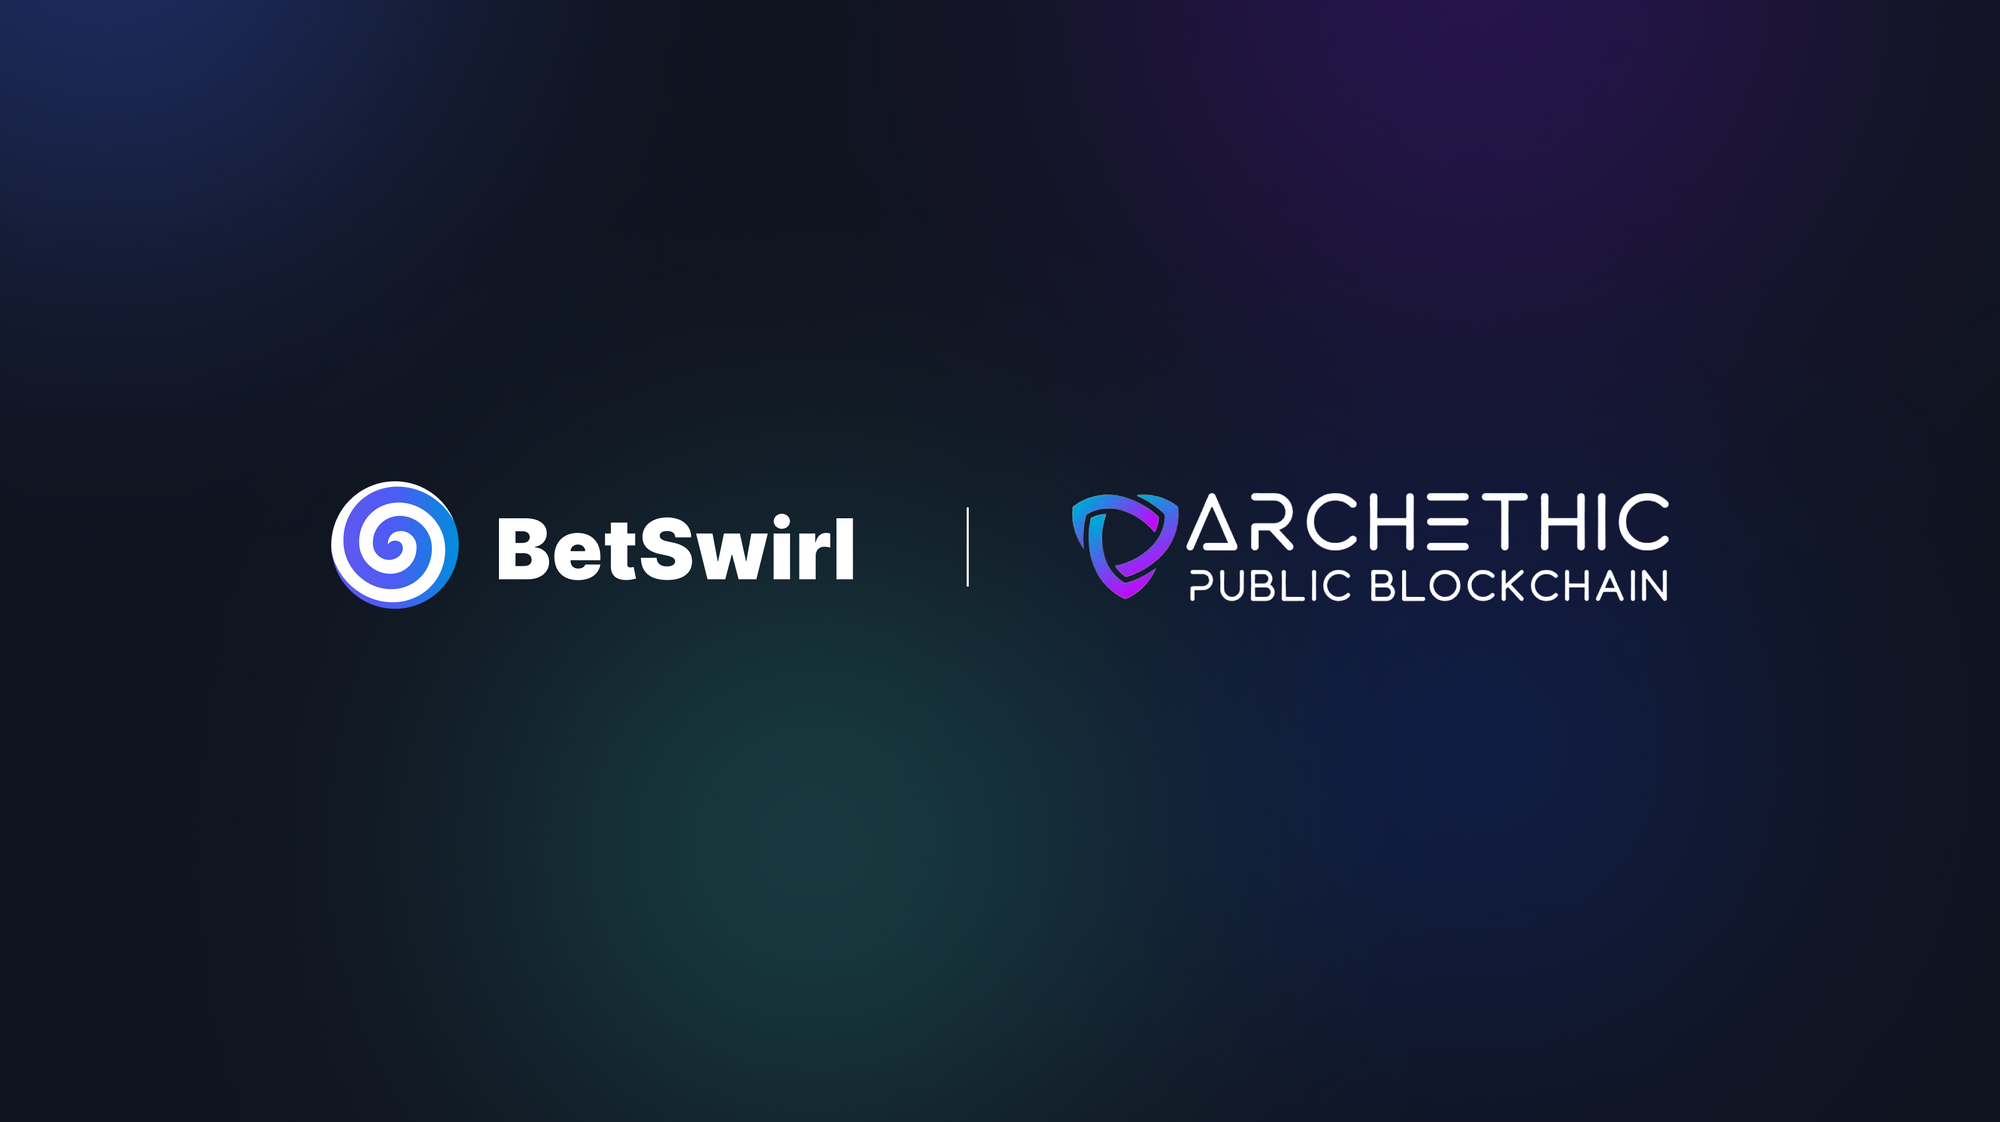 Archethic & Betswirl Partnership to Build a Multi-Chain Gambling Ecosystem